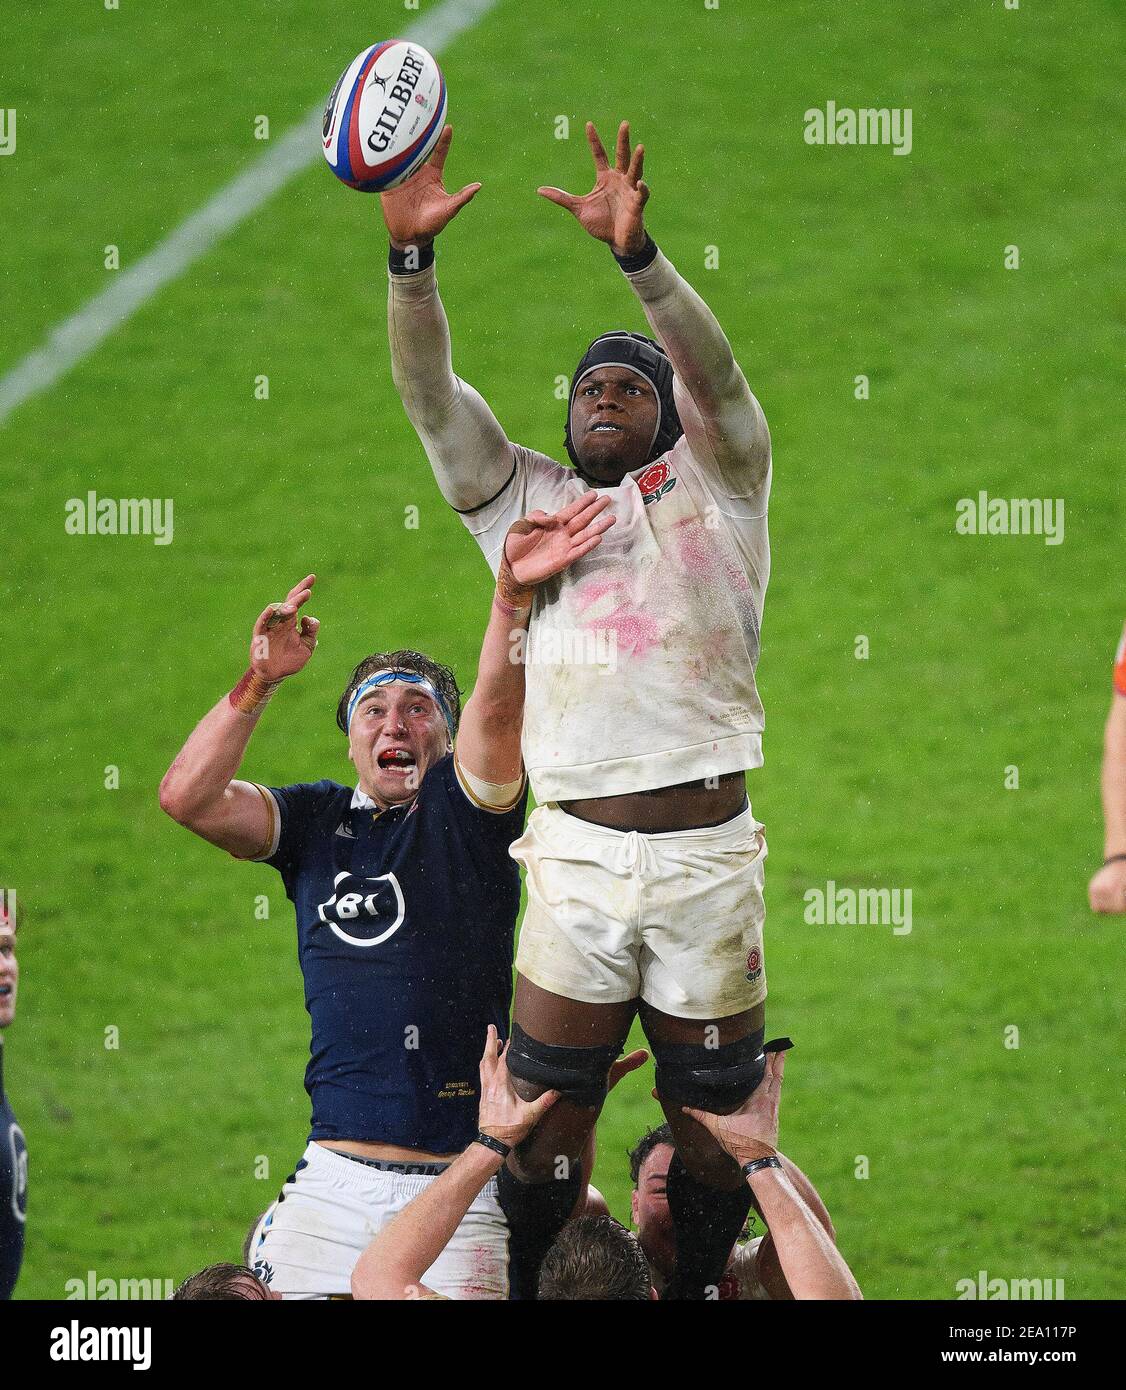 Twickenham, UK. 06th Feb, 2021. Twickenham Stadium, London 6th Feb 2021 England's Maro Itoje battles for the ball with George Turner during their Six Nations match against Scotland. Picture Credit : Credit: Mark Pain/Alamy Live News Stock Photo